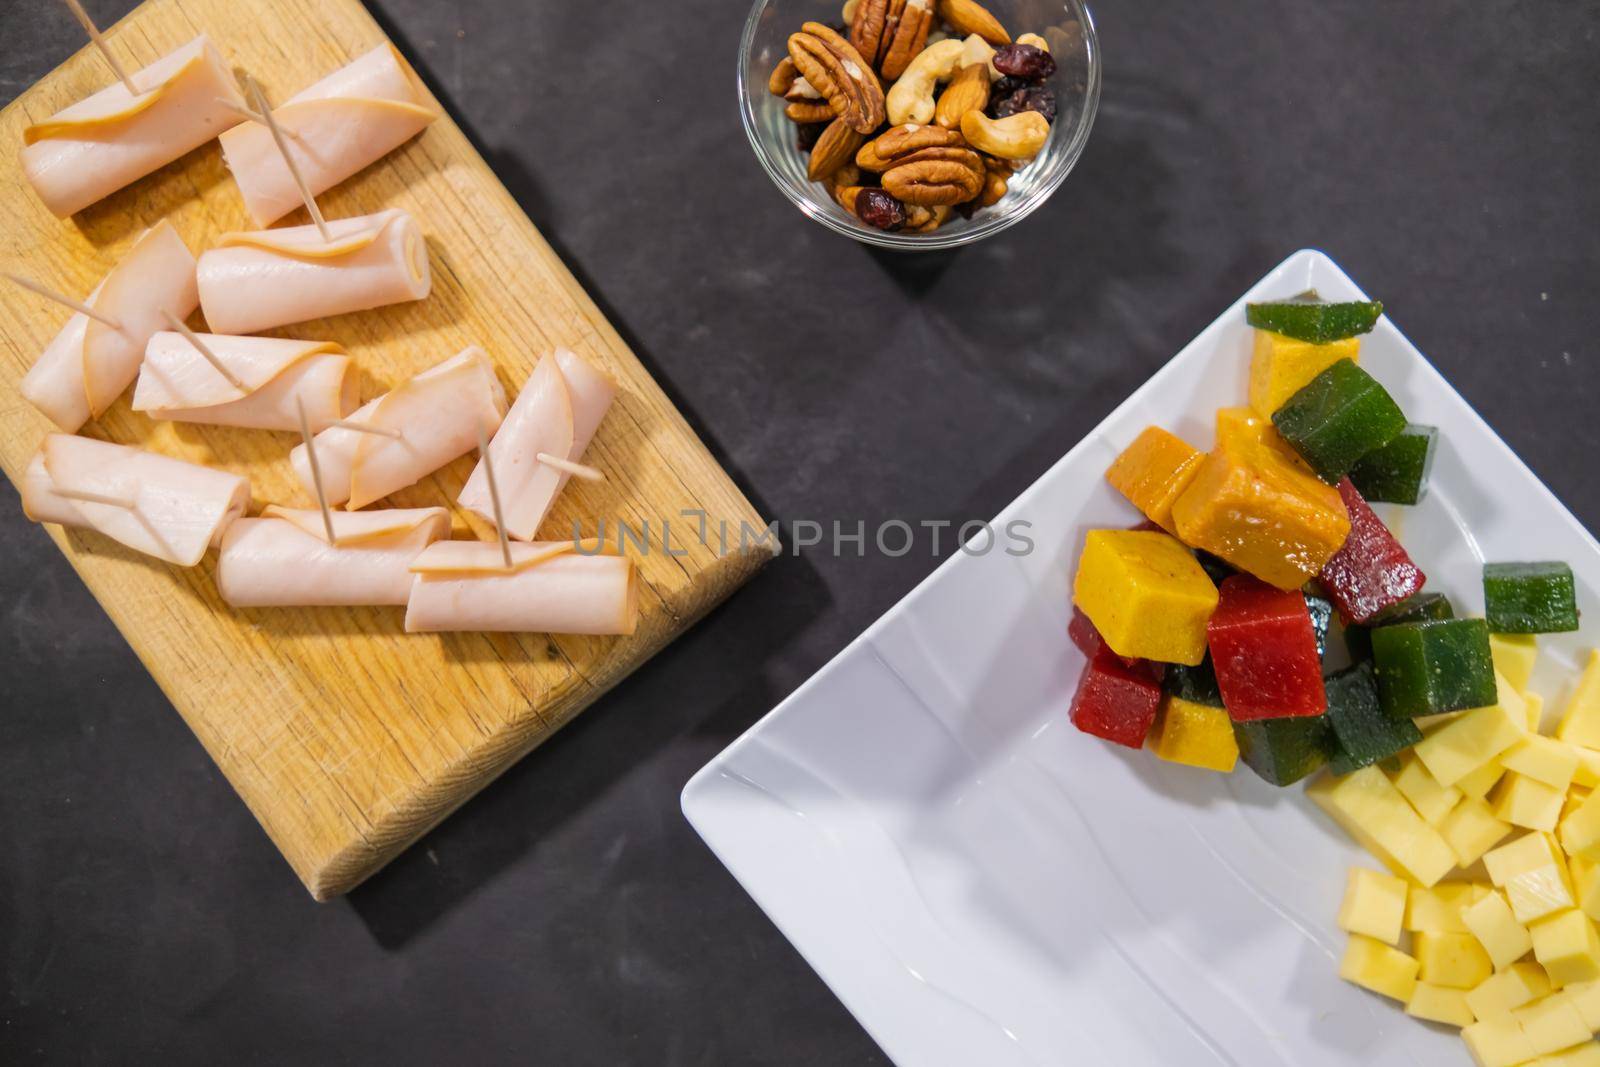 Top view of turkey ham rolls, diced fruit paste, cheese cubes, and walnuts above black surface. Fresh turkey meat, colorful diced food, and nuts on wooden boards, plates, and glass cups. Balanced diet